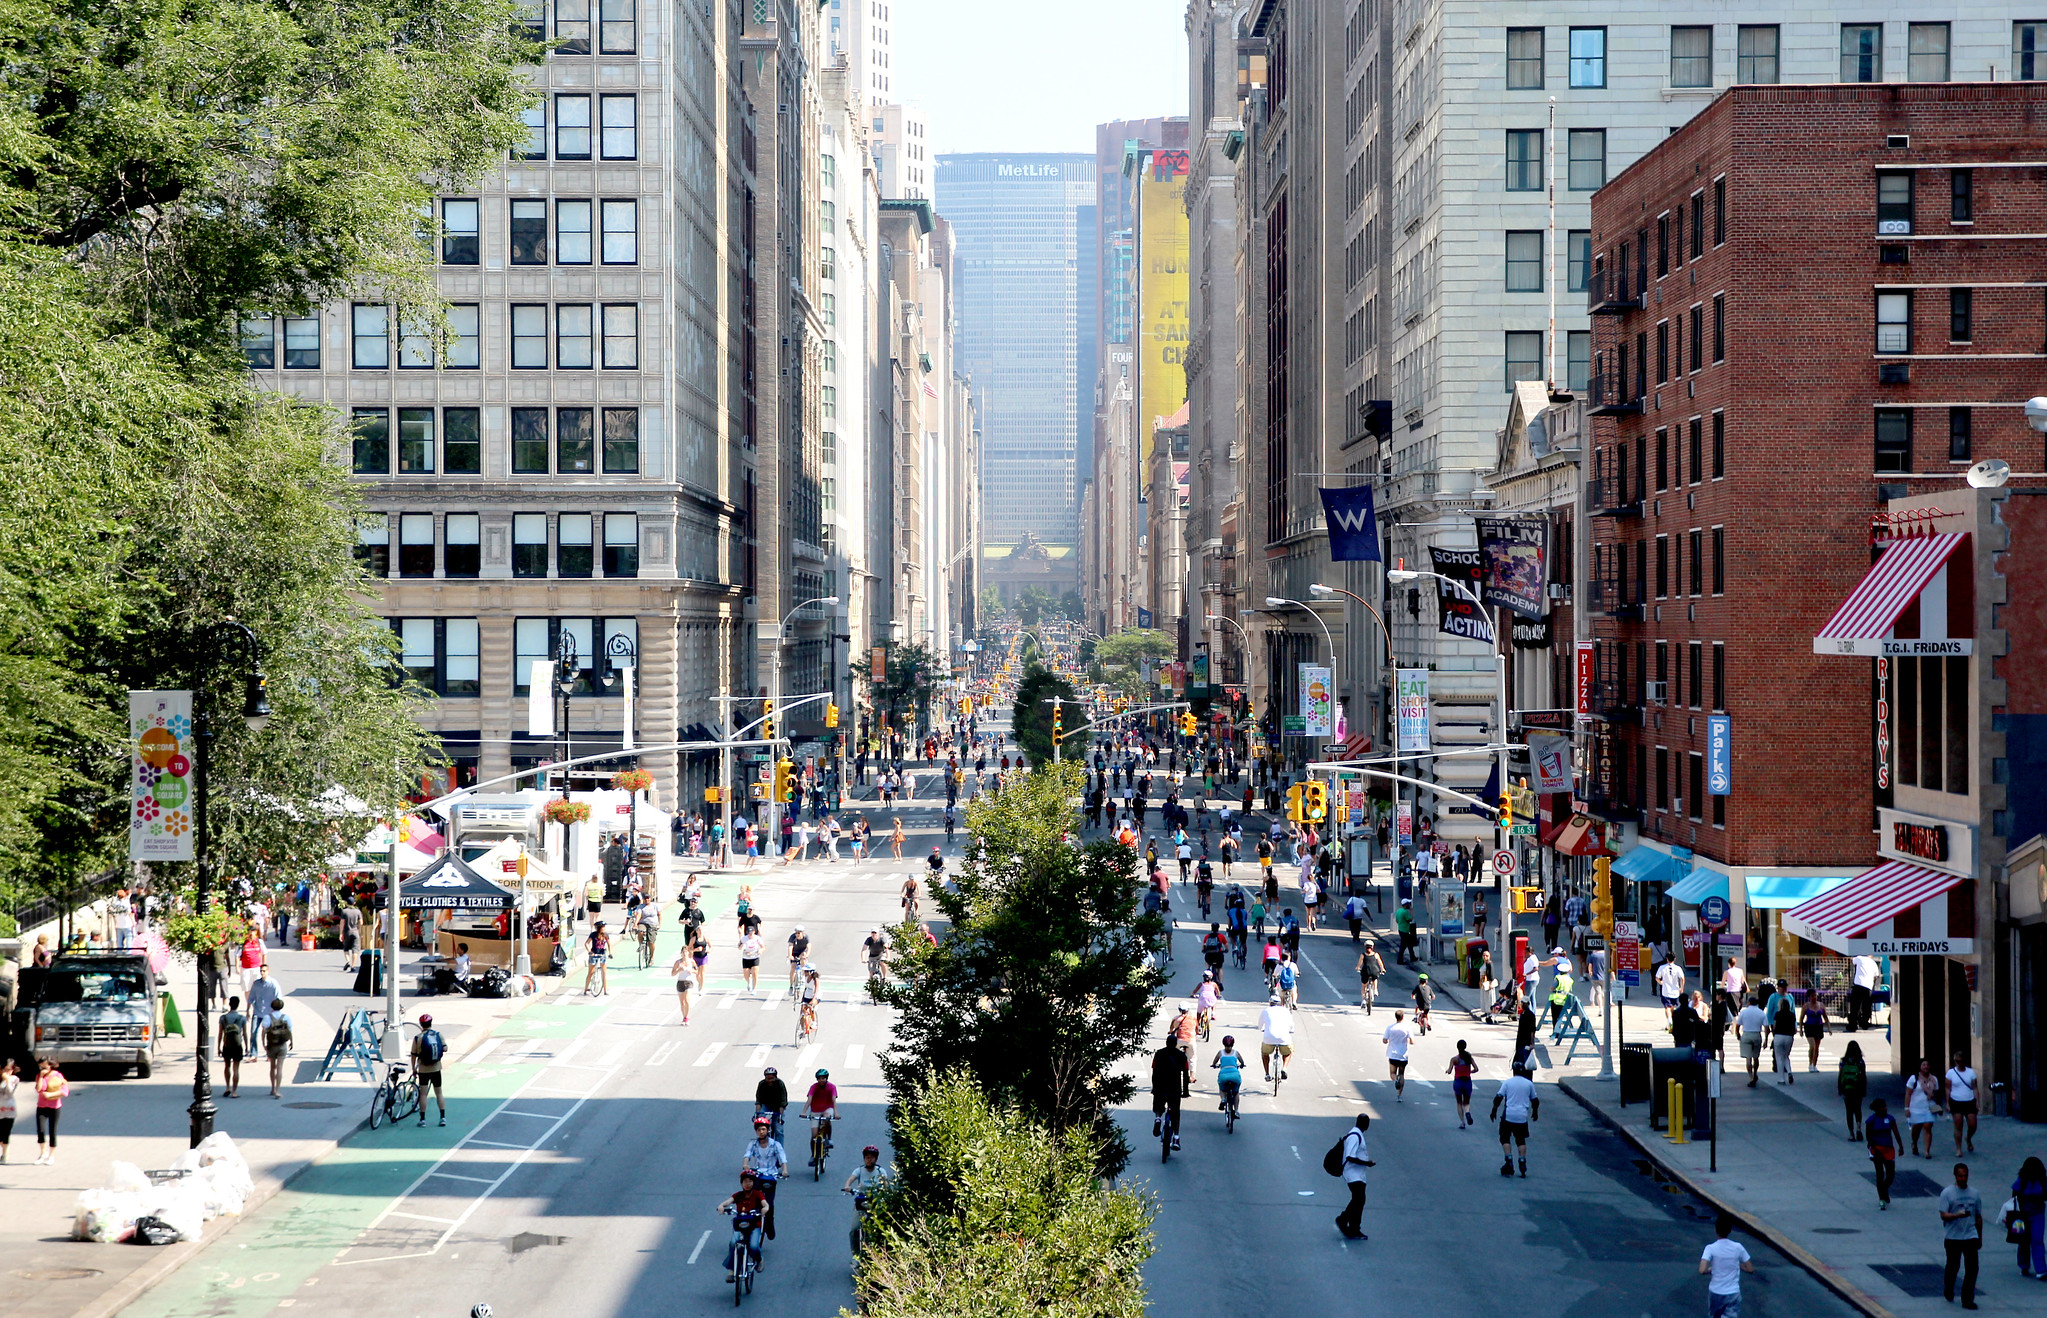 Community Op-ed: Now, Summer Streets is Coming to All Five Boroughs of New York City